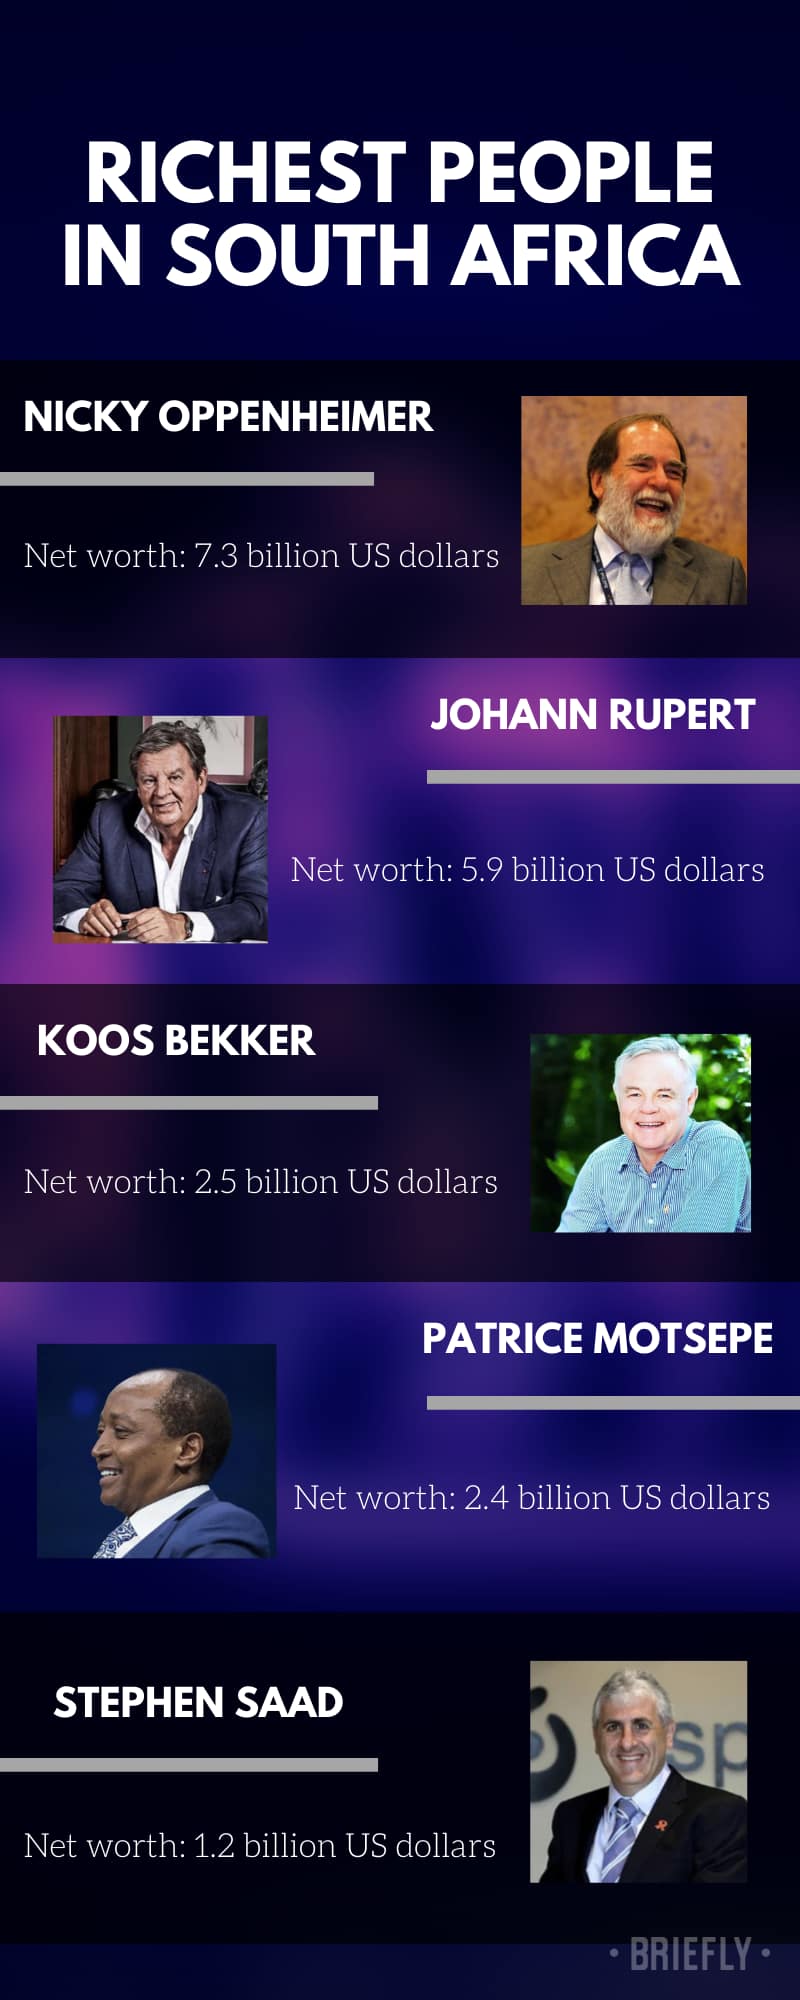 Top 10 richest people in South Africa and their net worth 2021